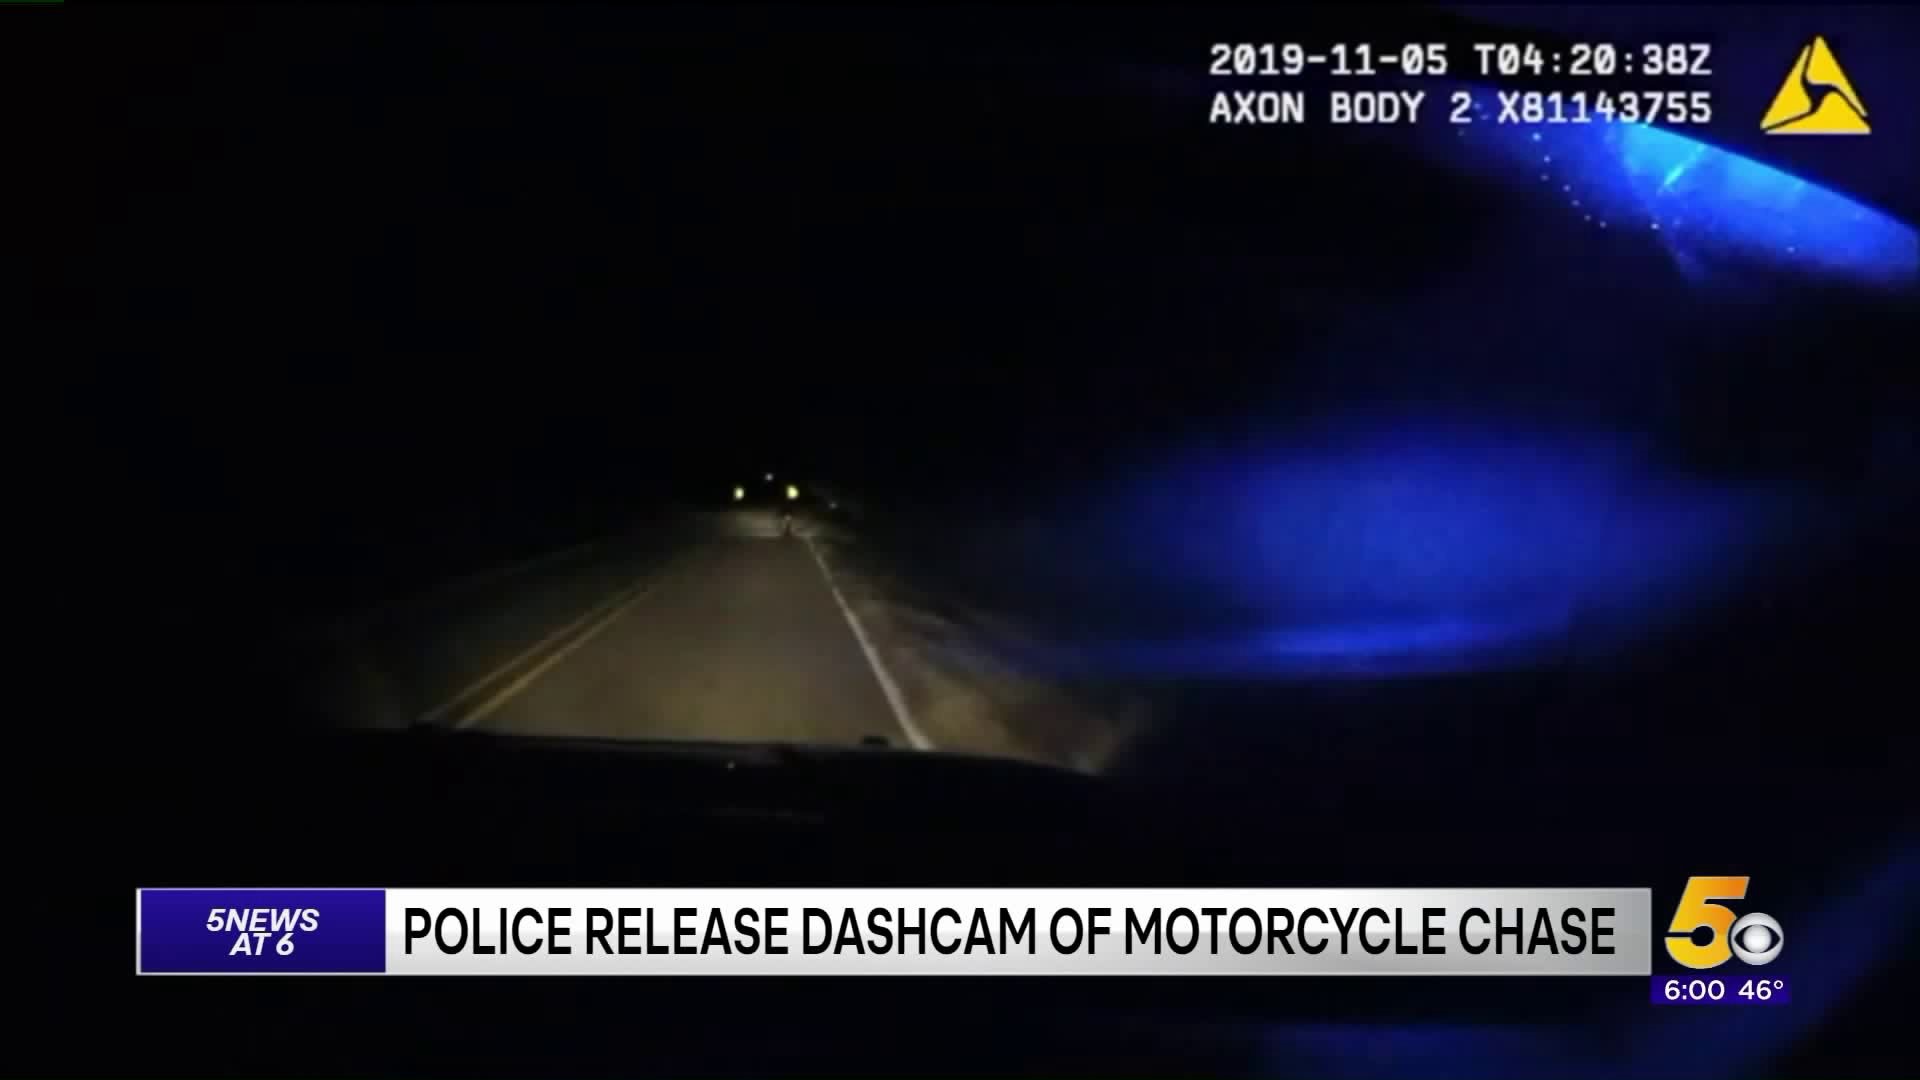 Police Release Dashcam Footage Of Motorcycle Chase